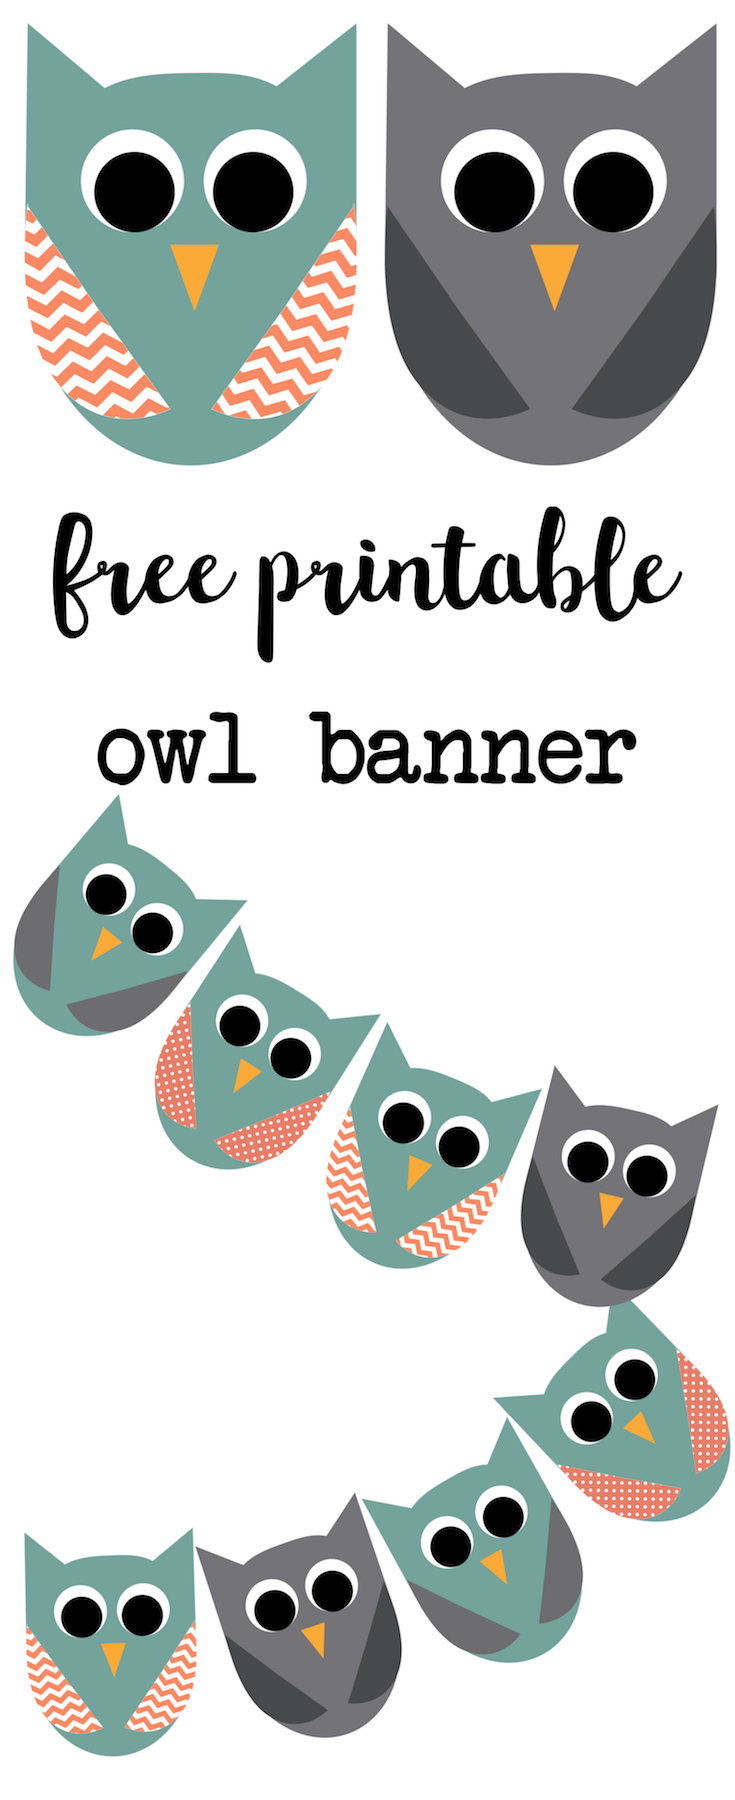 Free Printable Owl Banner. Print this owl banner for an owl birthday party or use it as an owl baby shower banner. Easy DIY for owl party decor. 